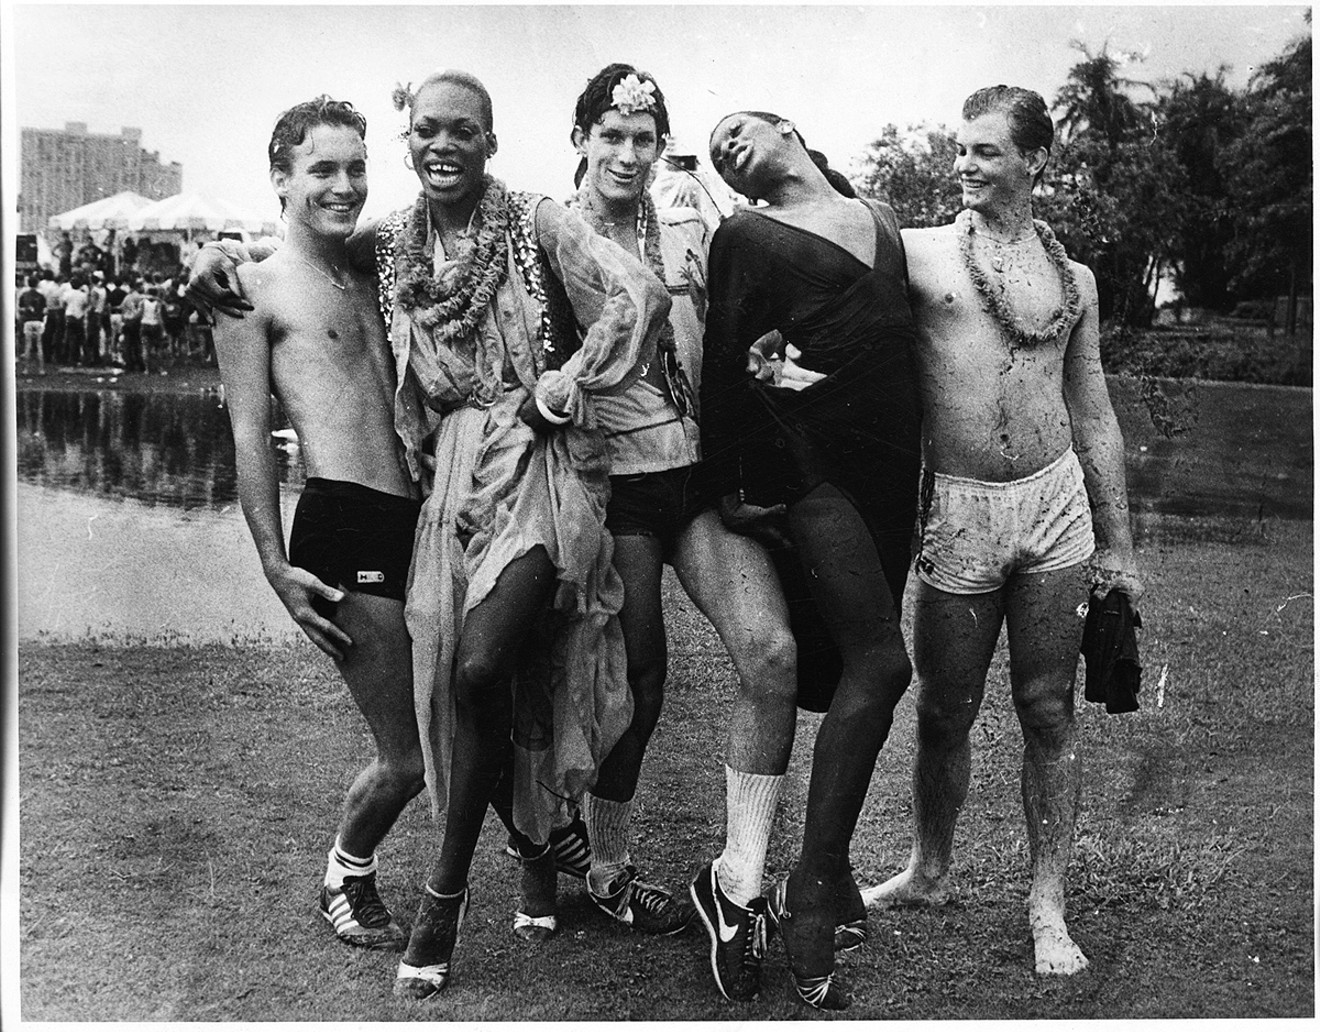 Miami has had a vibrant LGBTQ community since the city's earliest days. See more photos from HistoryMiami's "Queer Miami" exhibit here.